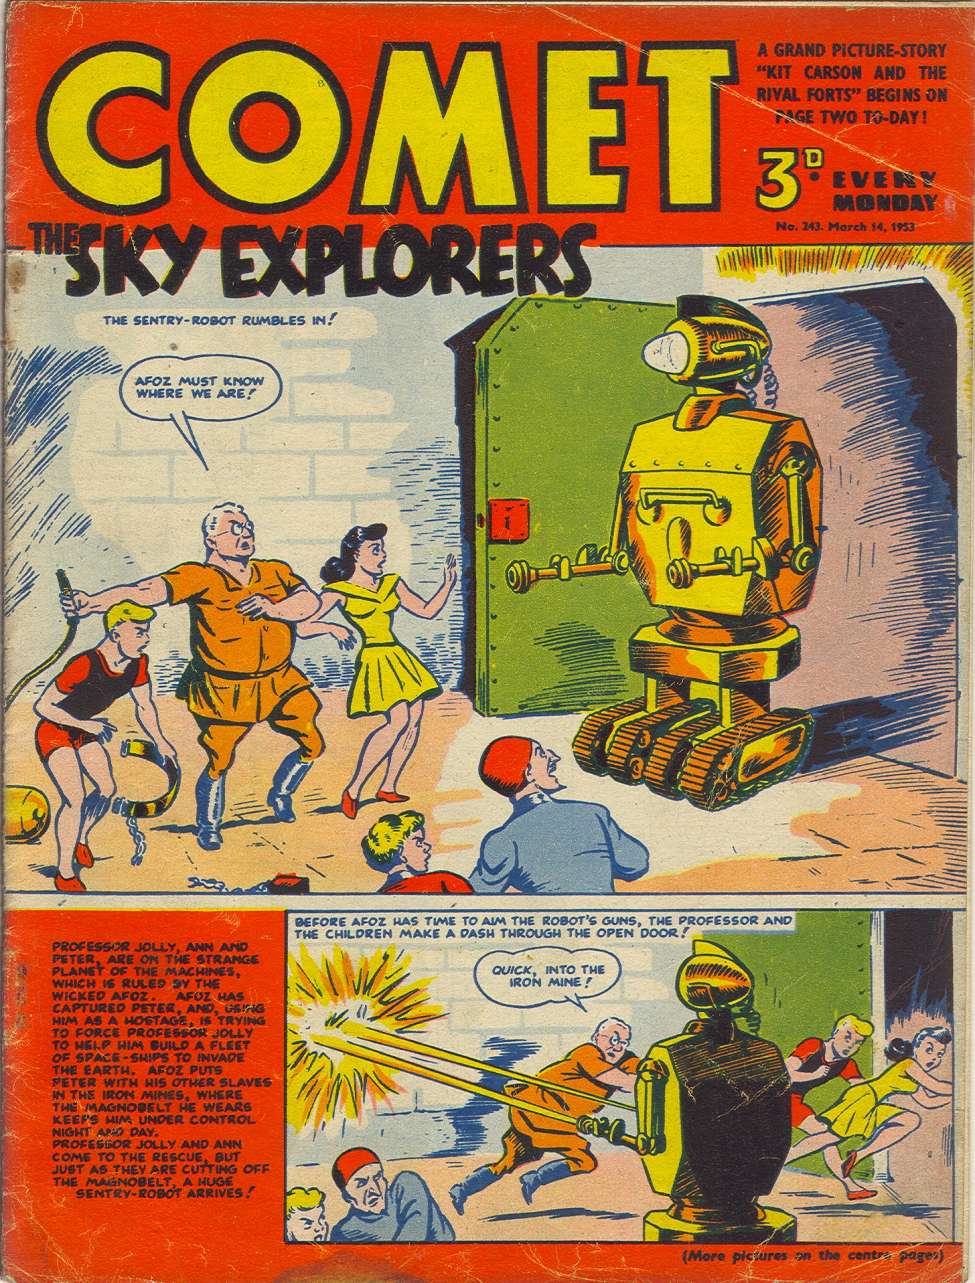 Book Cover For The Comet 243